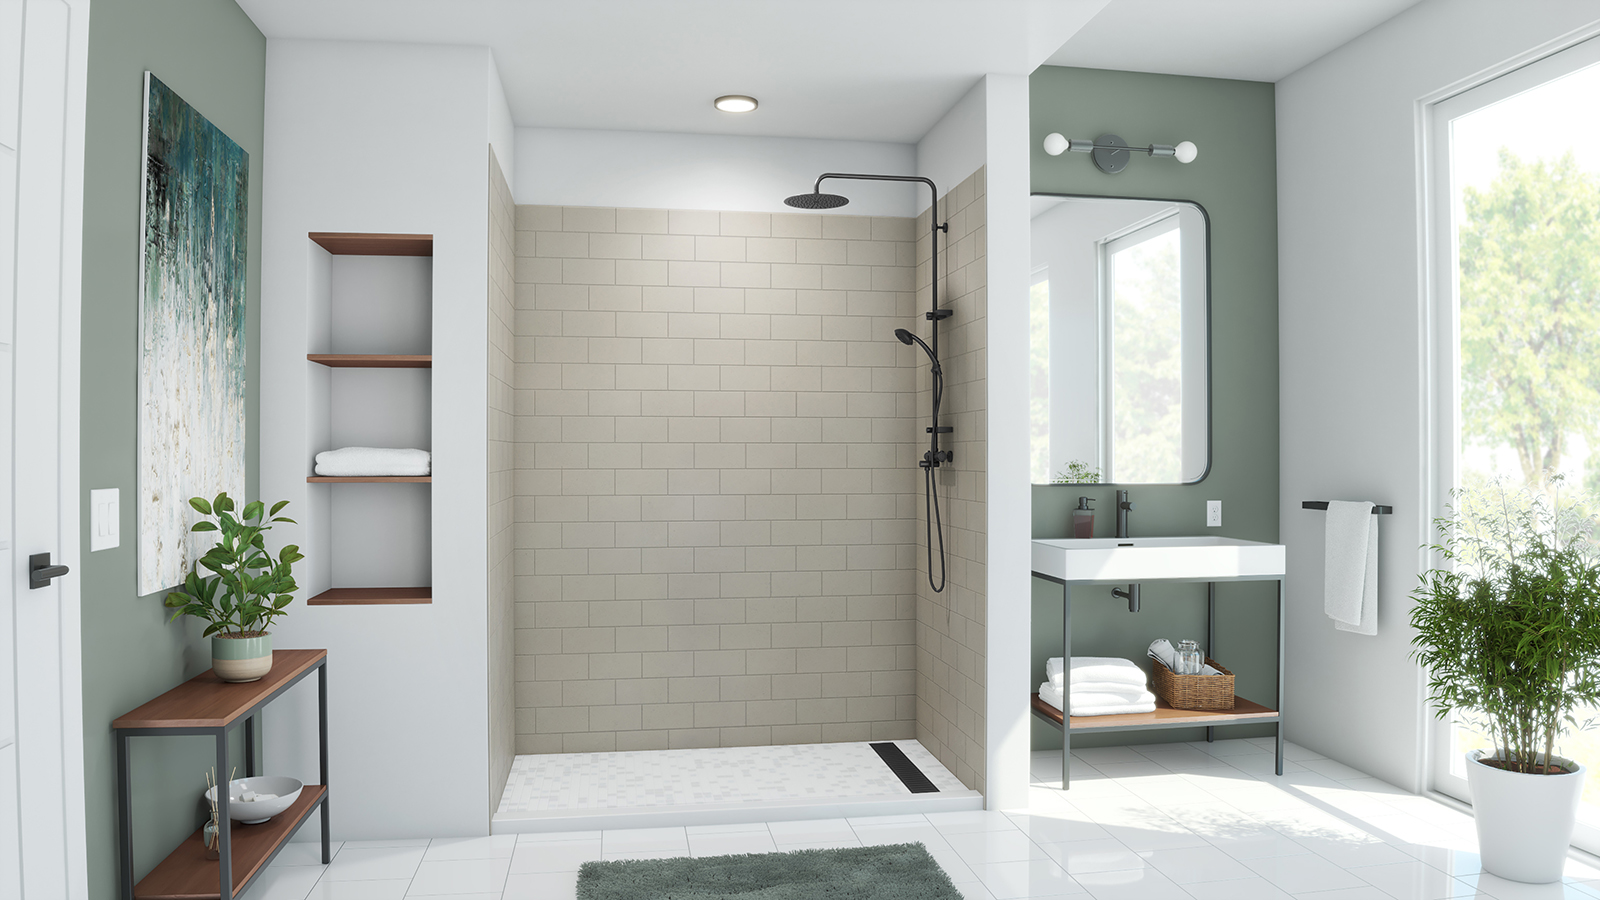 Swan's very own concrete shower wall limestone color.